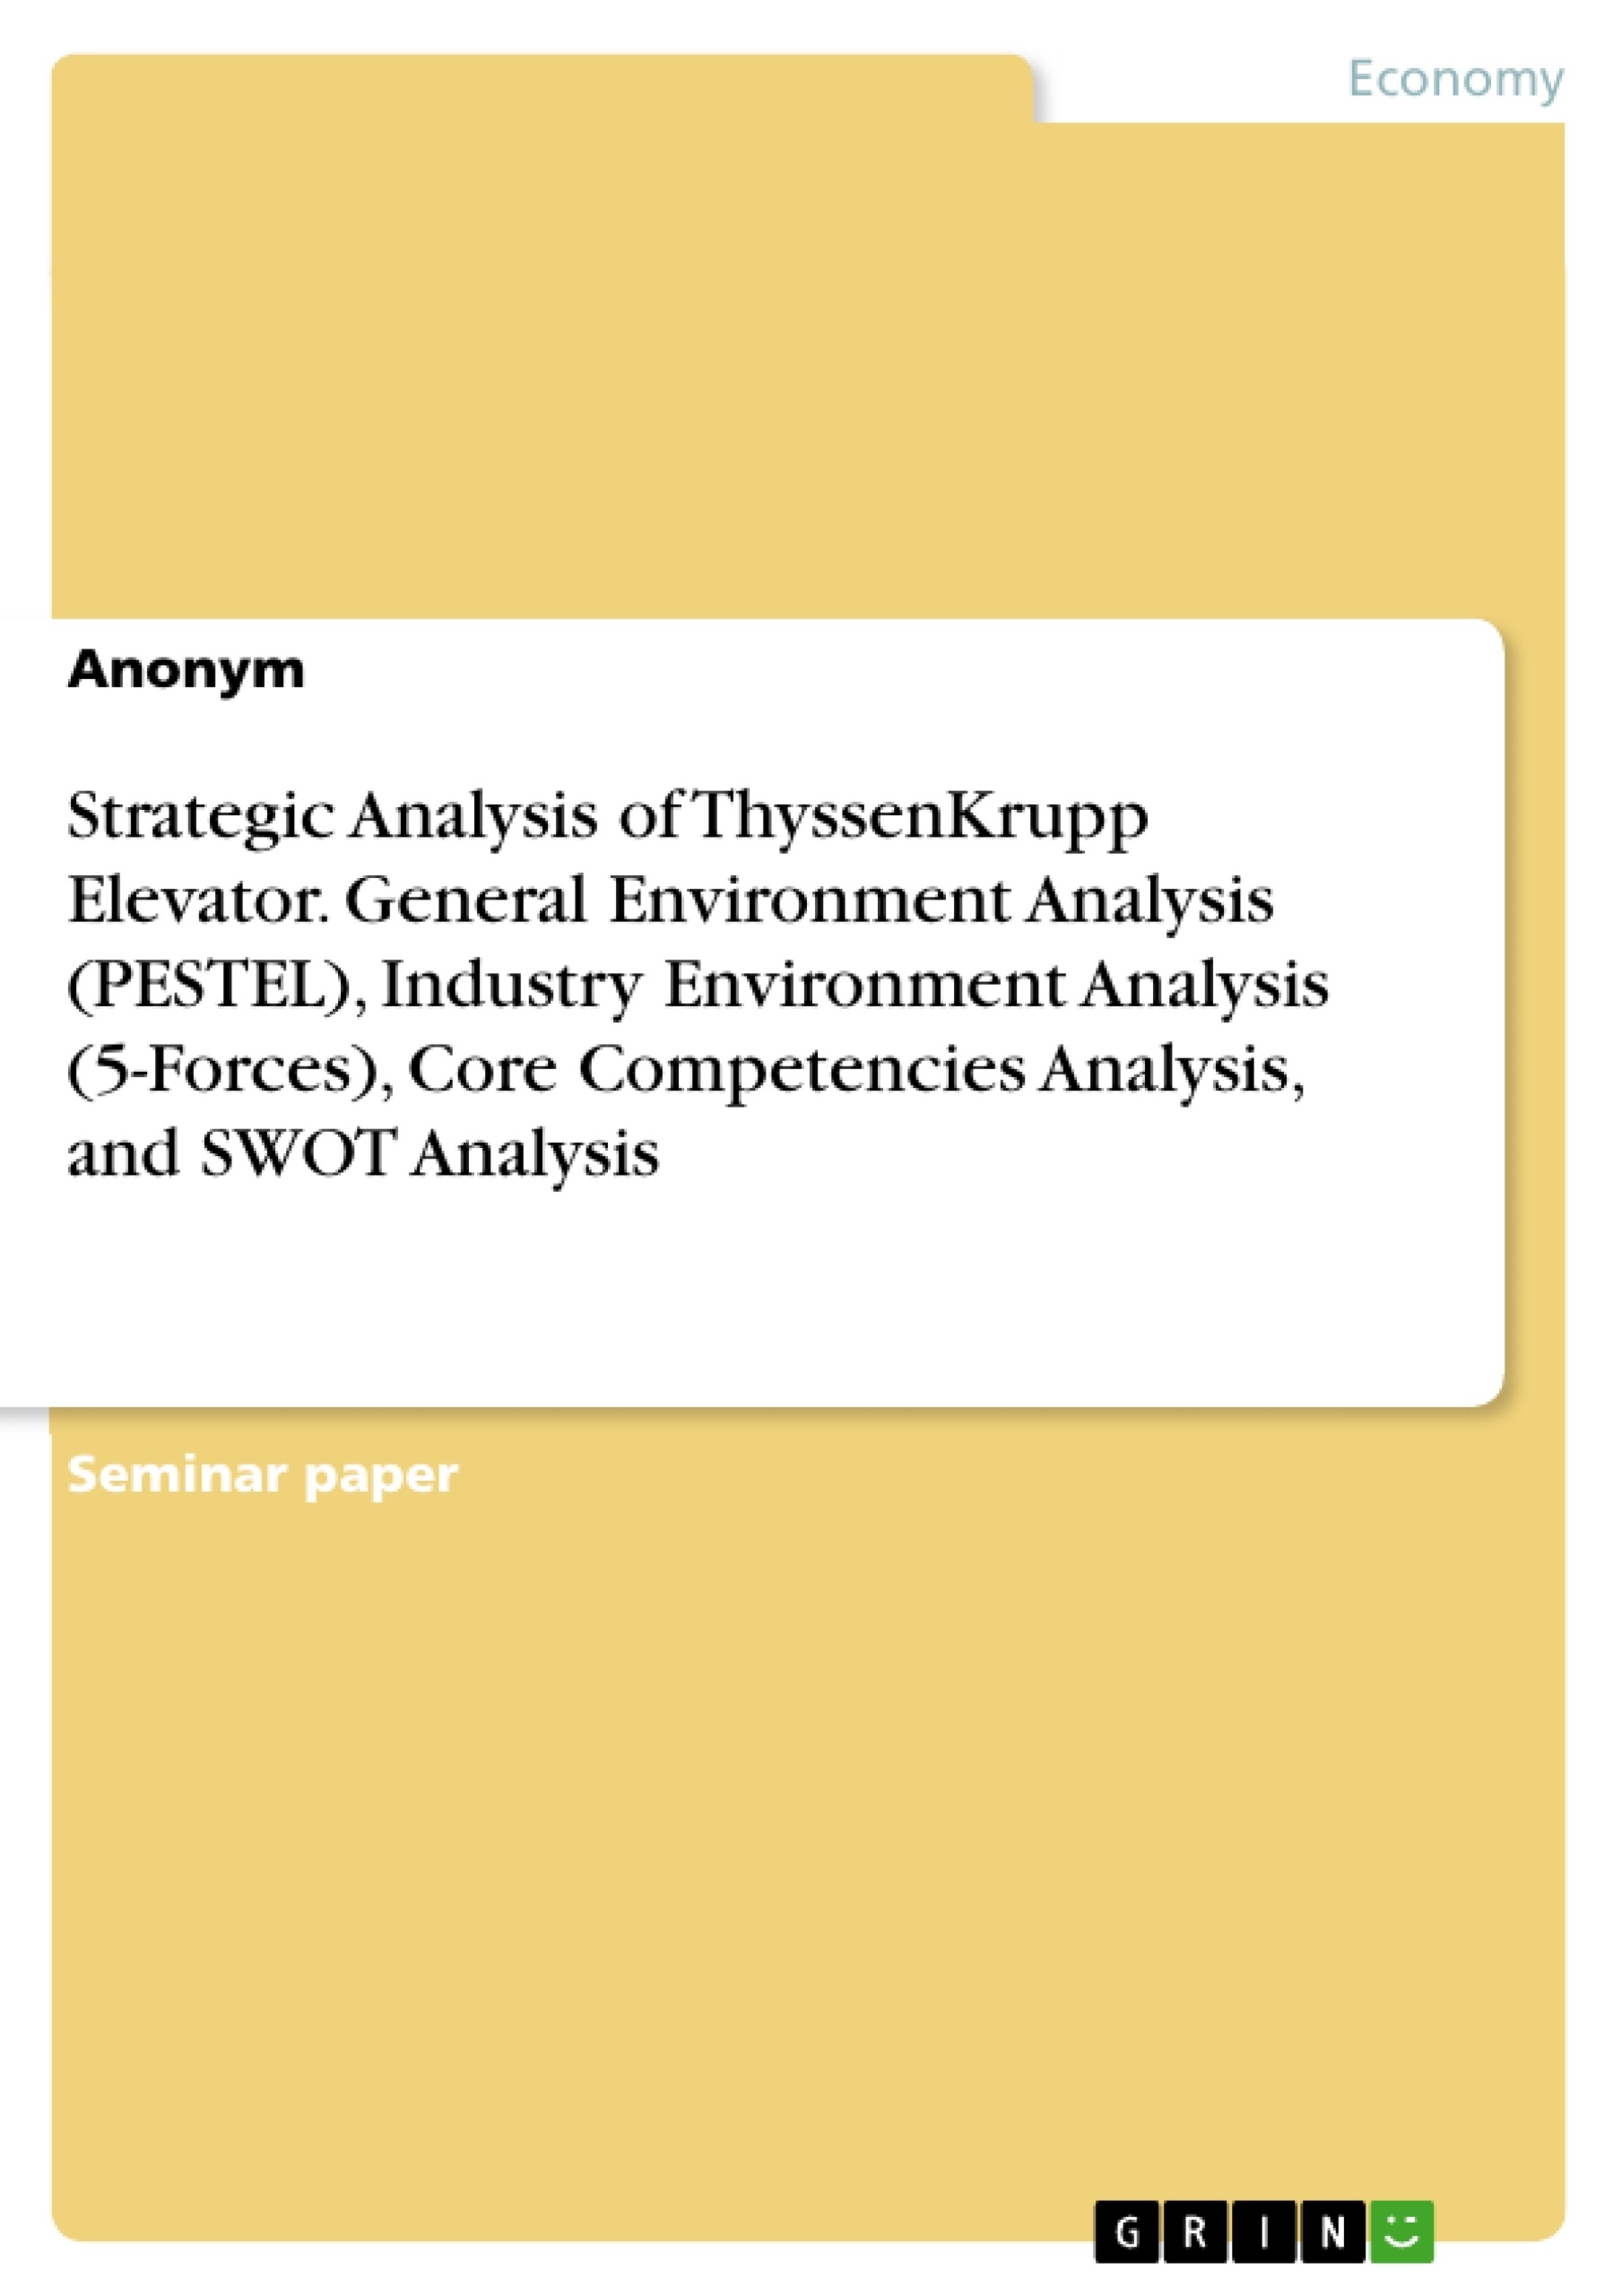 Title: Strategic Analysis of ThyssenKrupp Elevator. General Environment Analysis (PESTEL), Industry Environment Analysis (5-Forces), Core Competencies Analysis, and SWOT Analysis